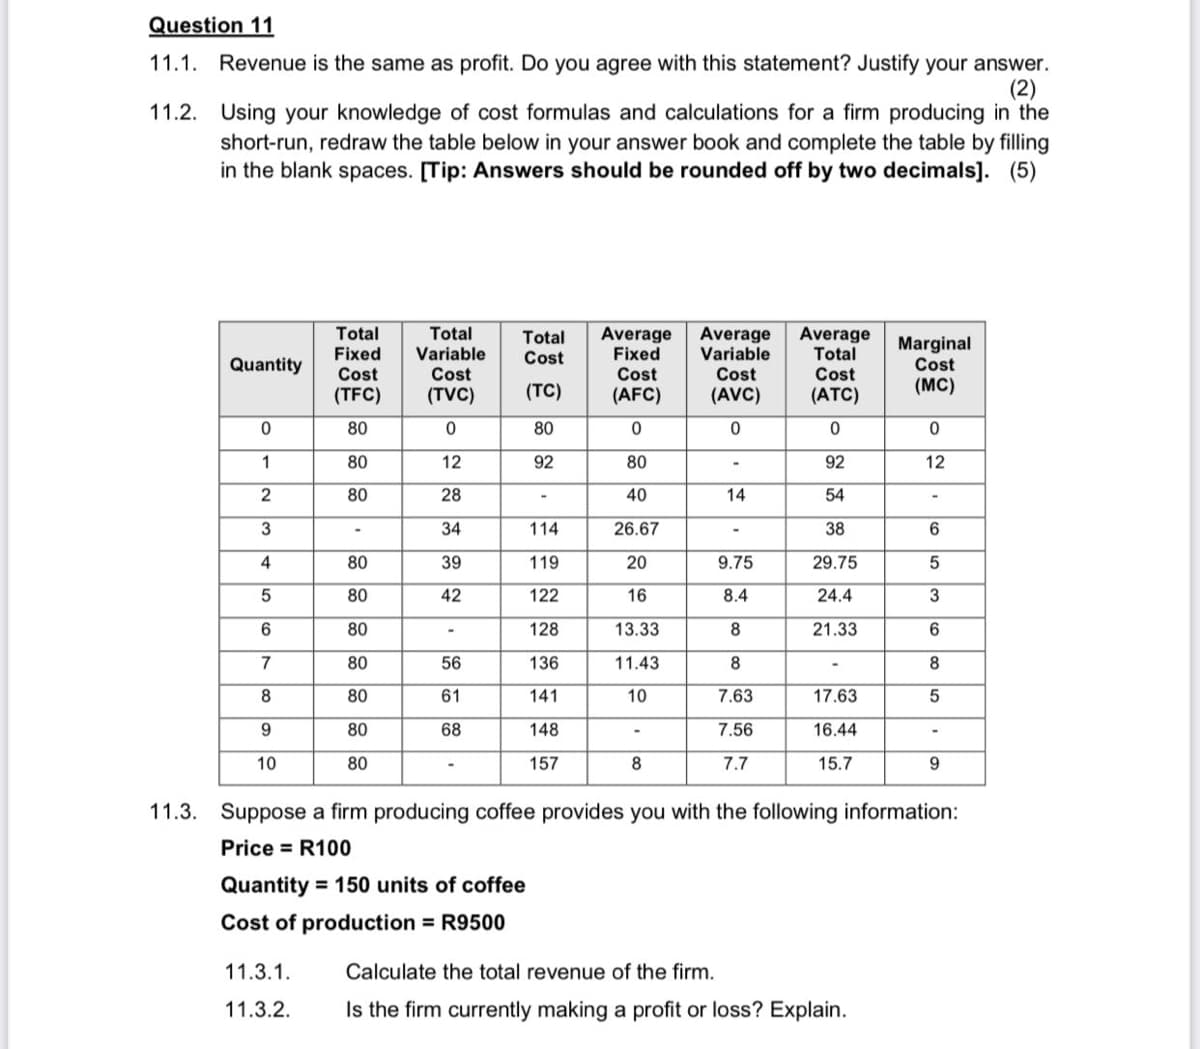 Question 11
11.1. Revenue is the same as profit. Do you agree with this statement? Justify your answer.
11.2. Using your knowledge of cost formulas and calculations for a firm producing in the
short-run, redraw the table below in your answer book and complete the table by filling
in the blank spaces. [Tip: Answers should be rounded off by two decimals]. (5)
Total
Average
Variable
Cost
Average
Total
Cost
(ATC)
Total
Total
Cost
Average
Fixed
Fixed
Cost
Marginal
Cost
(MC)
Variable
Quantity
Cost
Cost
(TFC)
(TVC)
(TC)
(AFC)
(AVC)
80
80
1
80
12
80
12
2
80
28
40
14
54
3
34
114
26.67
38
6.
4
80
39
119
20
9.75
29.75
80
42
122
16
8.4
24.4
80
128
13.33
8
21.33
7
80
56
136
11.43
8
8
80
61
141
10
7.63
17.63
9
80
68
148
7.56
16.44
10
80
157
8
7.7
15.7
9.
11.3.
Suppose a firm producing coffee provides you with the following information:
Price = R100
Quantity = 150 units of coffee
Cost of production = R9500
11.3.1.
Calculate the total revenue of the firm.
11.3.2.
Is the firm currently making a profit or loss? Explain.
